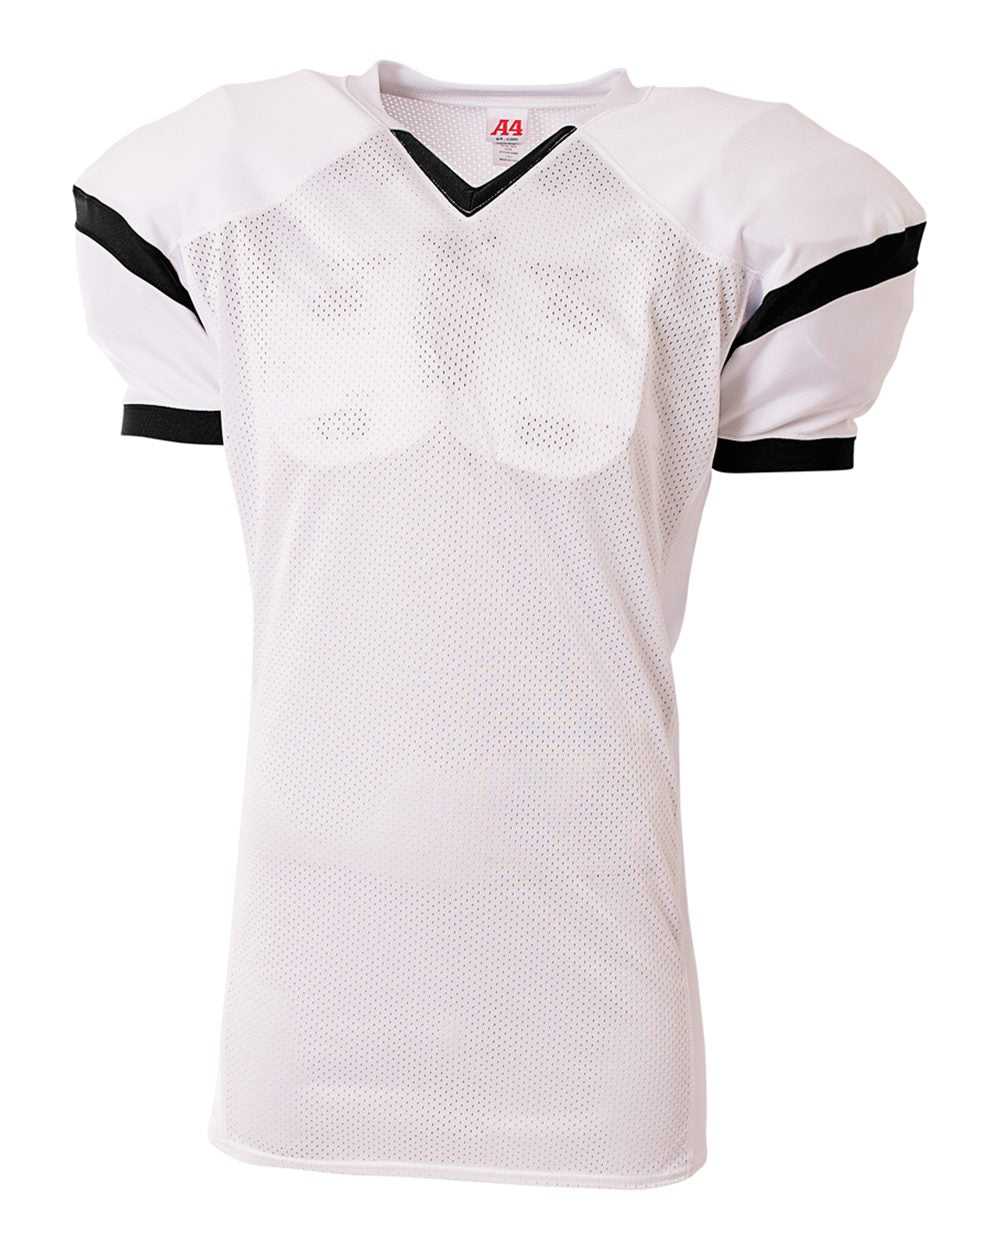 A4 NB4265 The Rollout Football Jersey - White Black - HIT a Double